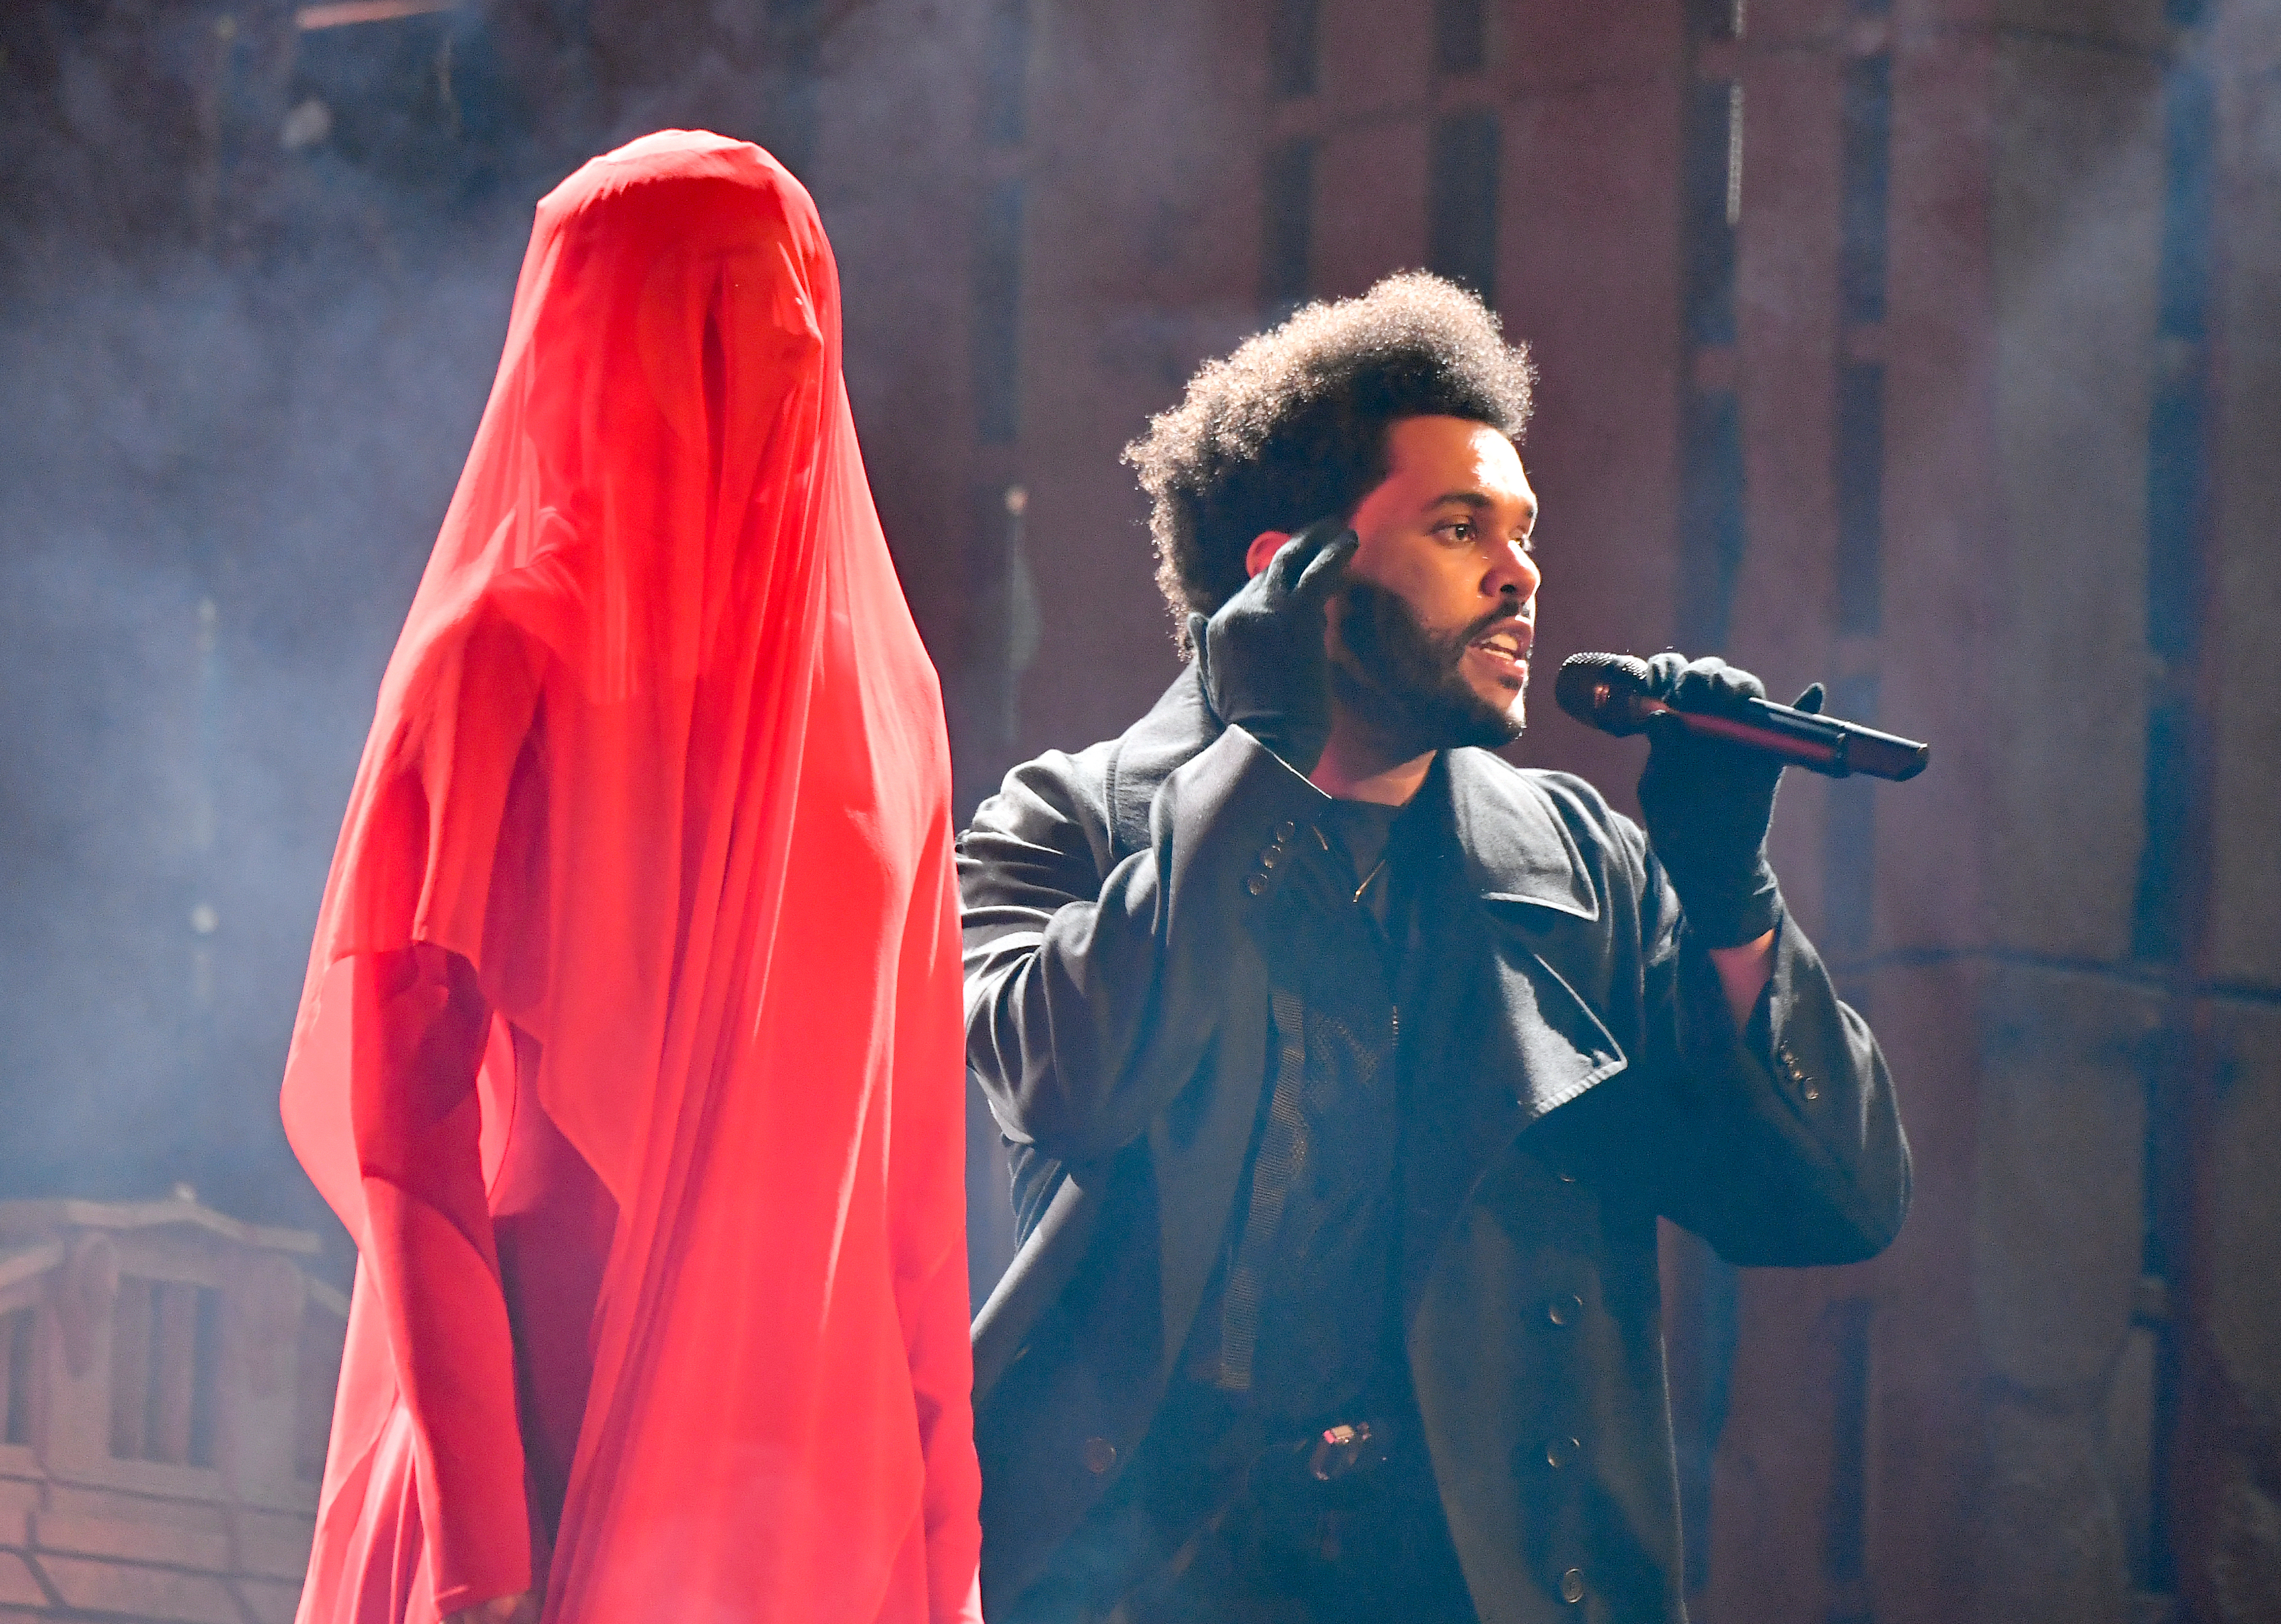 The Weeknd onstage with a completely covered person standing next to him as he sings